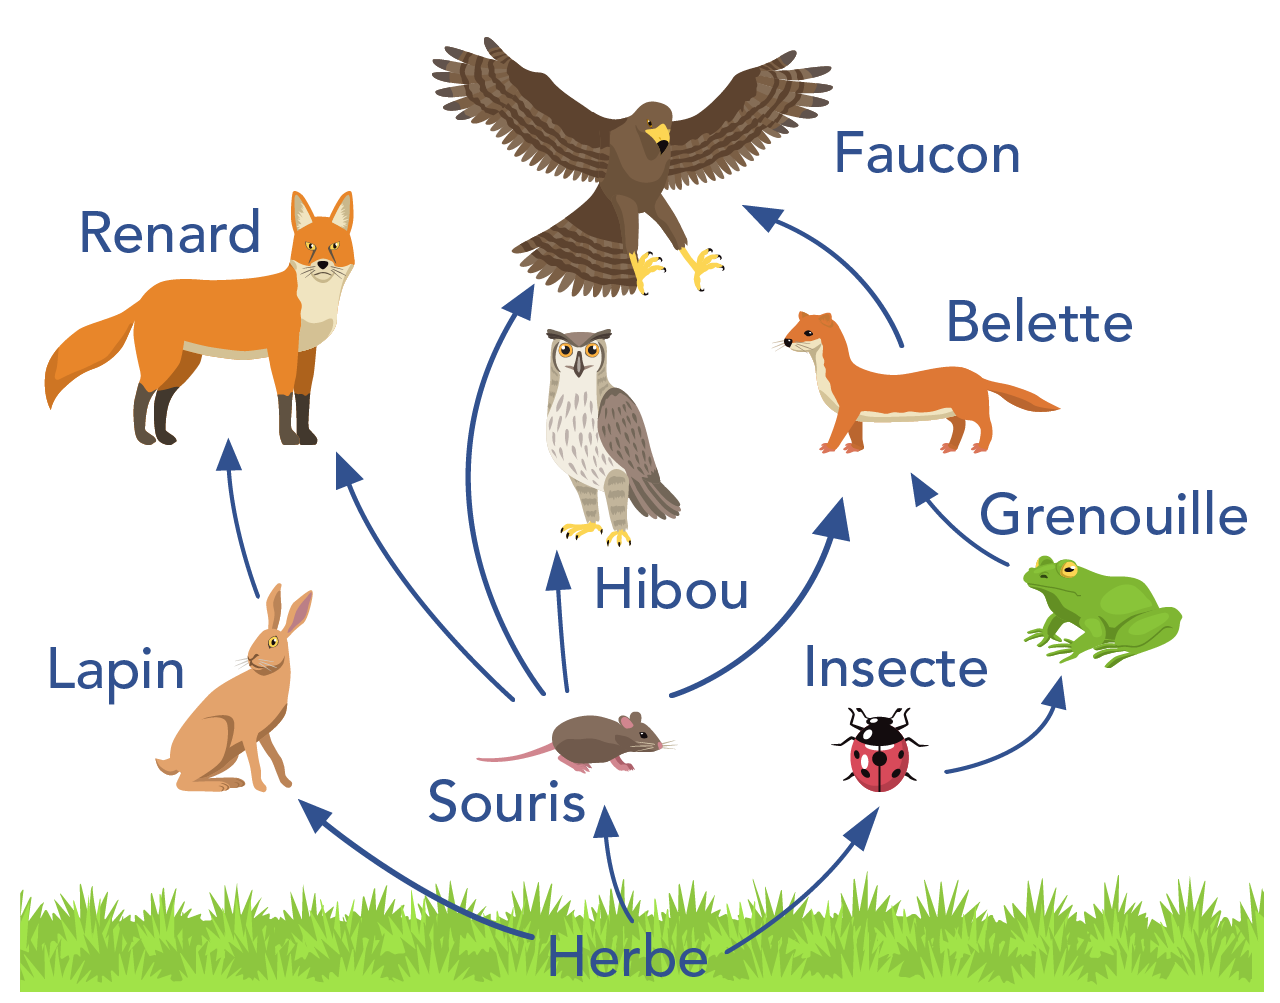 Shown is an illustration of several different types of animals, with a layer of grass at the very bottom. Arrows with direction indicators connect the animals to each other and to the grass.